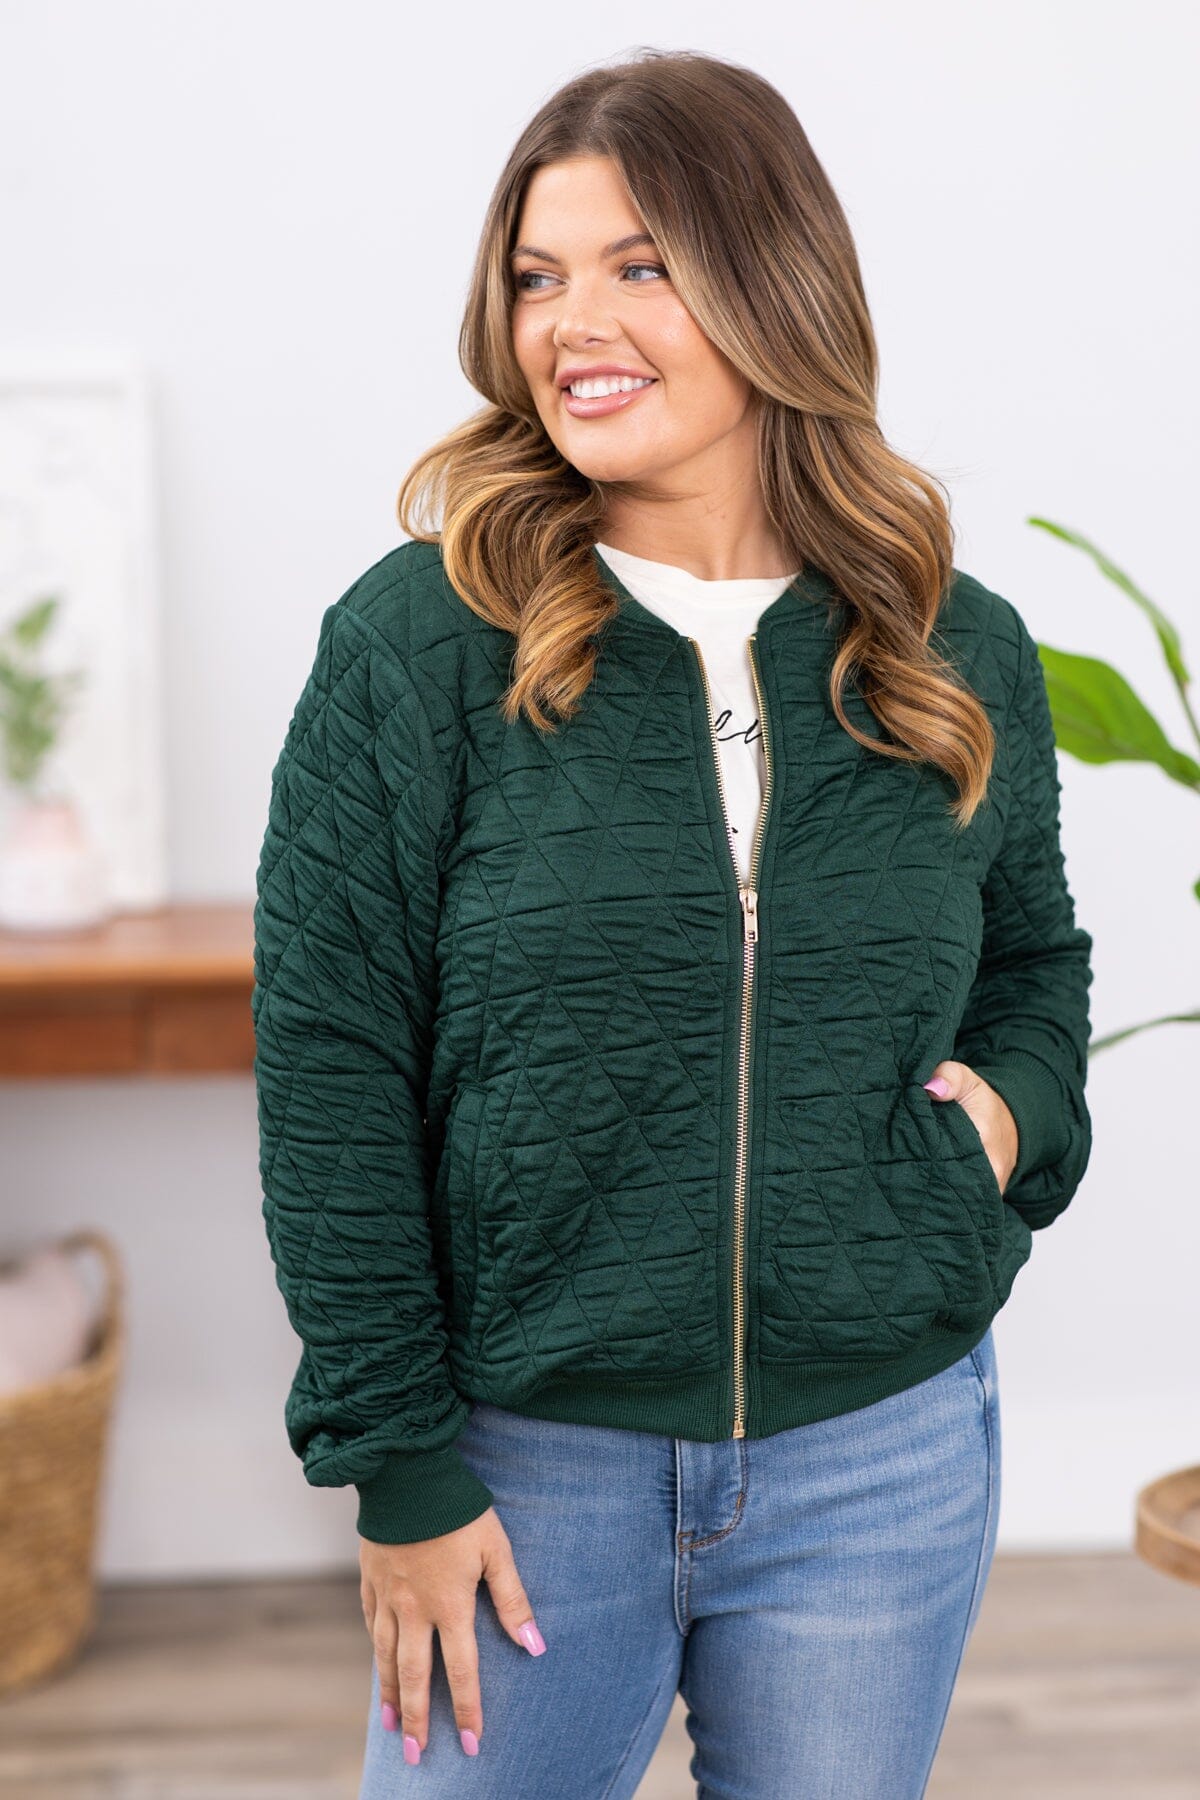 Hunter Green Quilted Bomber Jacket - Filly Flair